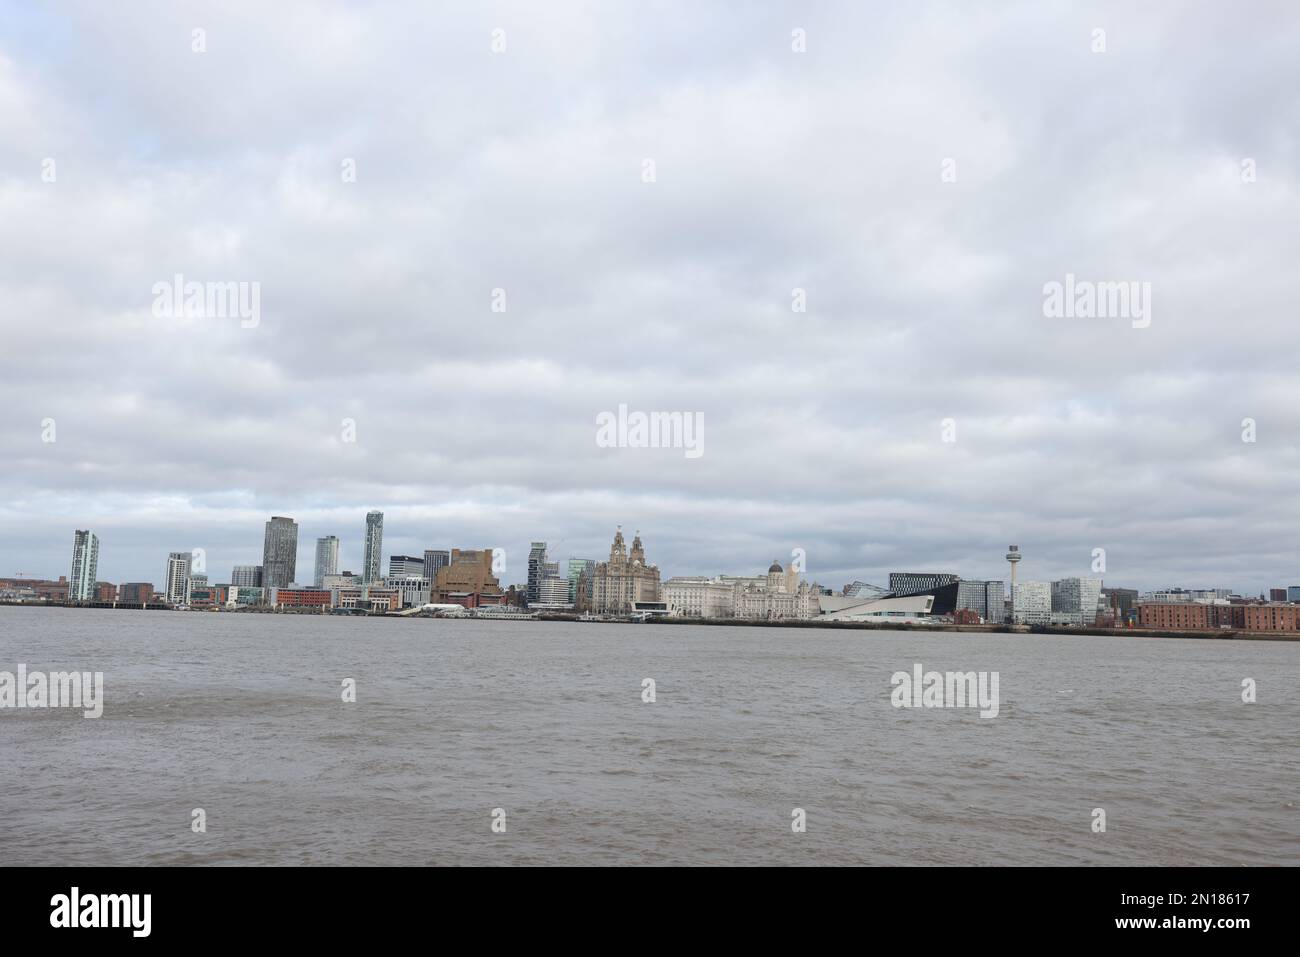 General views of Liverpool dockside buildings including the Royal Liver Building, Museum of Liverpool, ACC Convention centre, M&S Bank arena, UK. Stock Photo